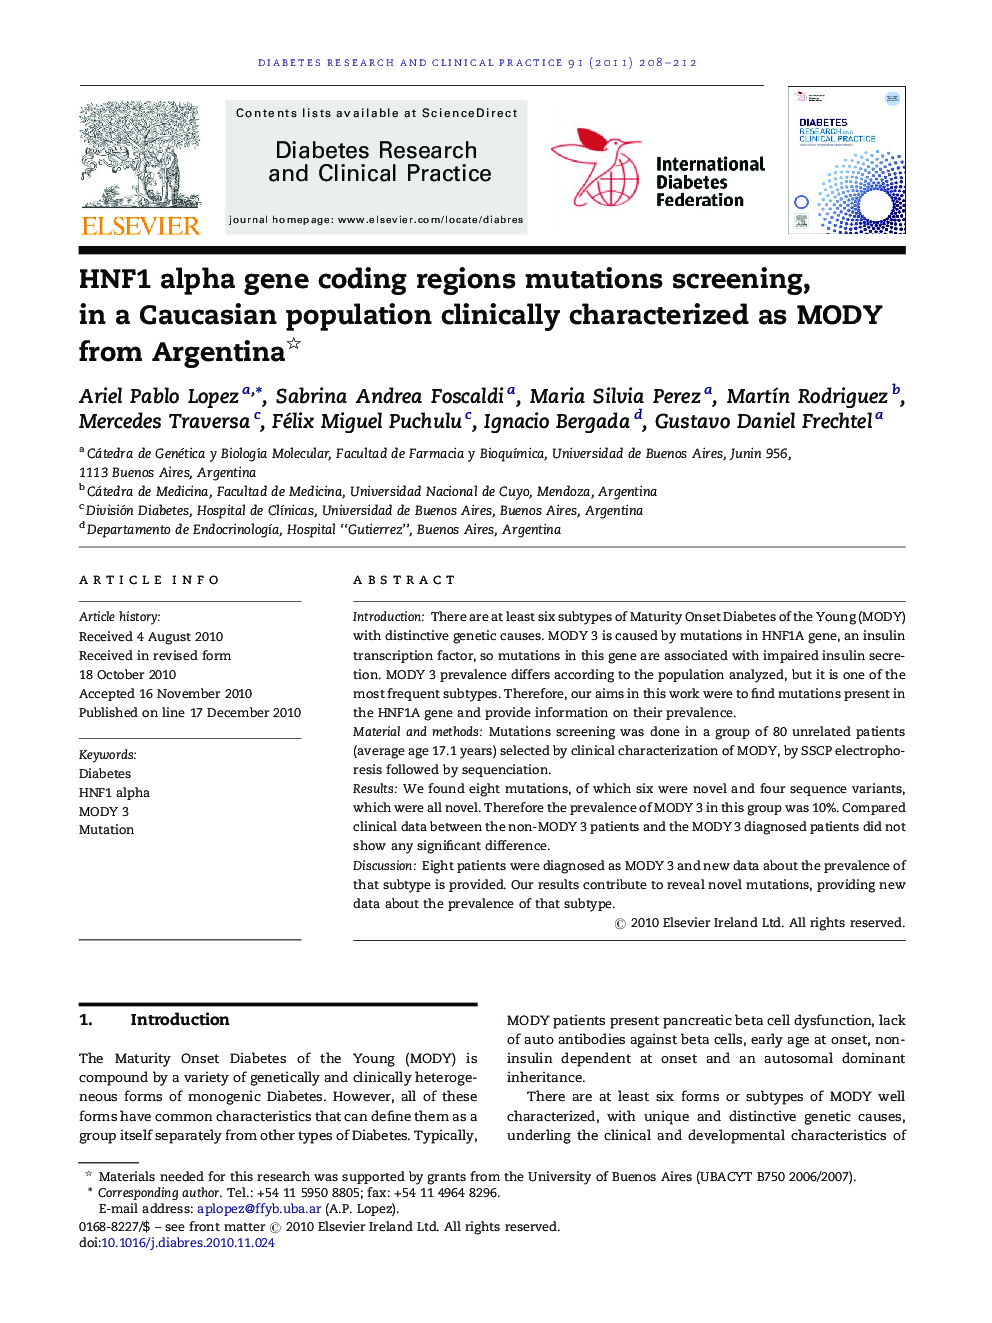 HNF1 alpha gene coding regions mutations screening, in a Caucasian population clinically characterized as MODY from Argentina 